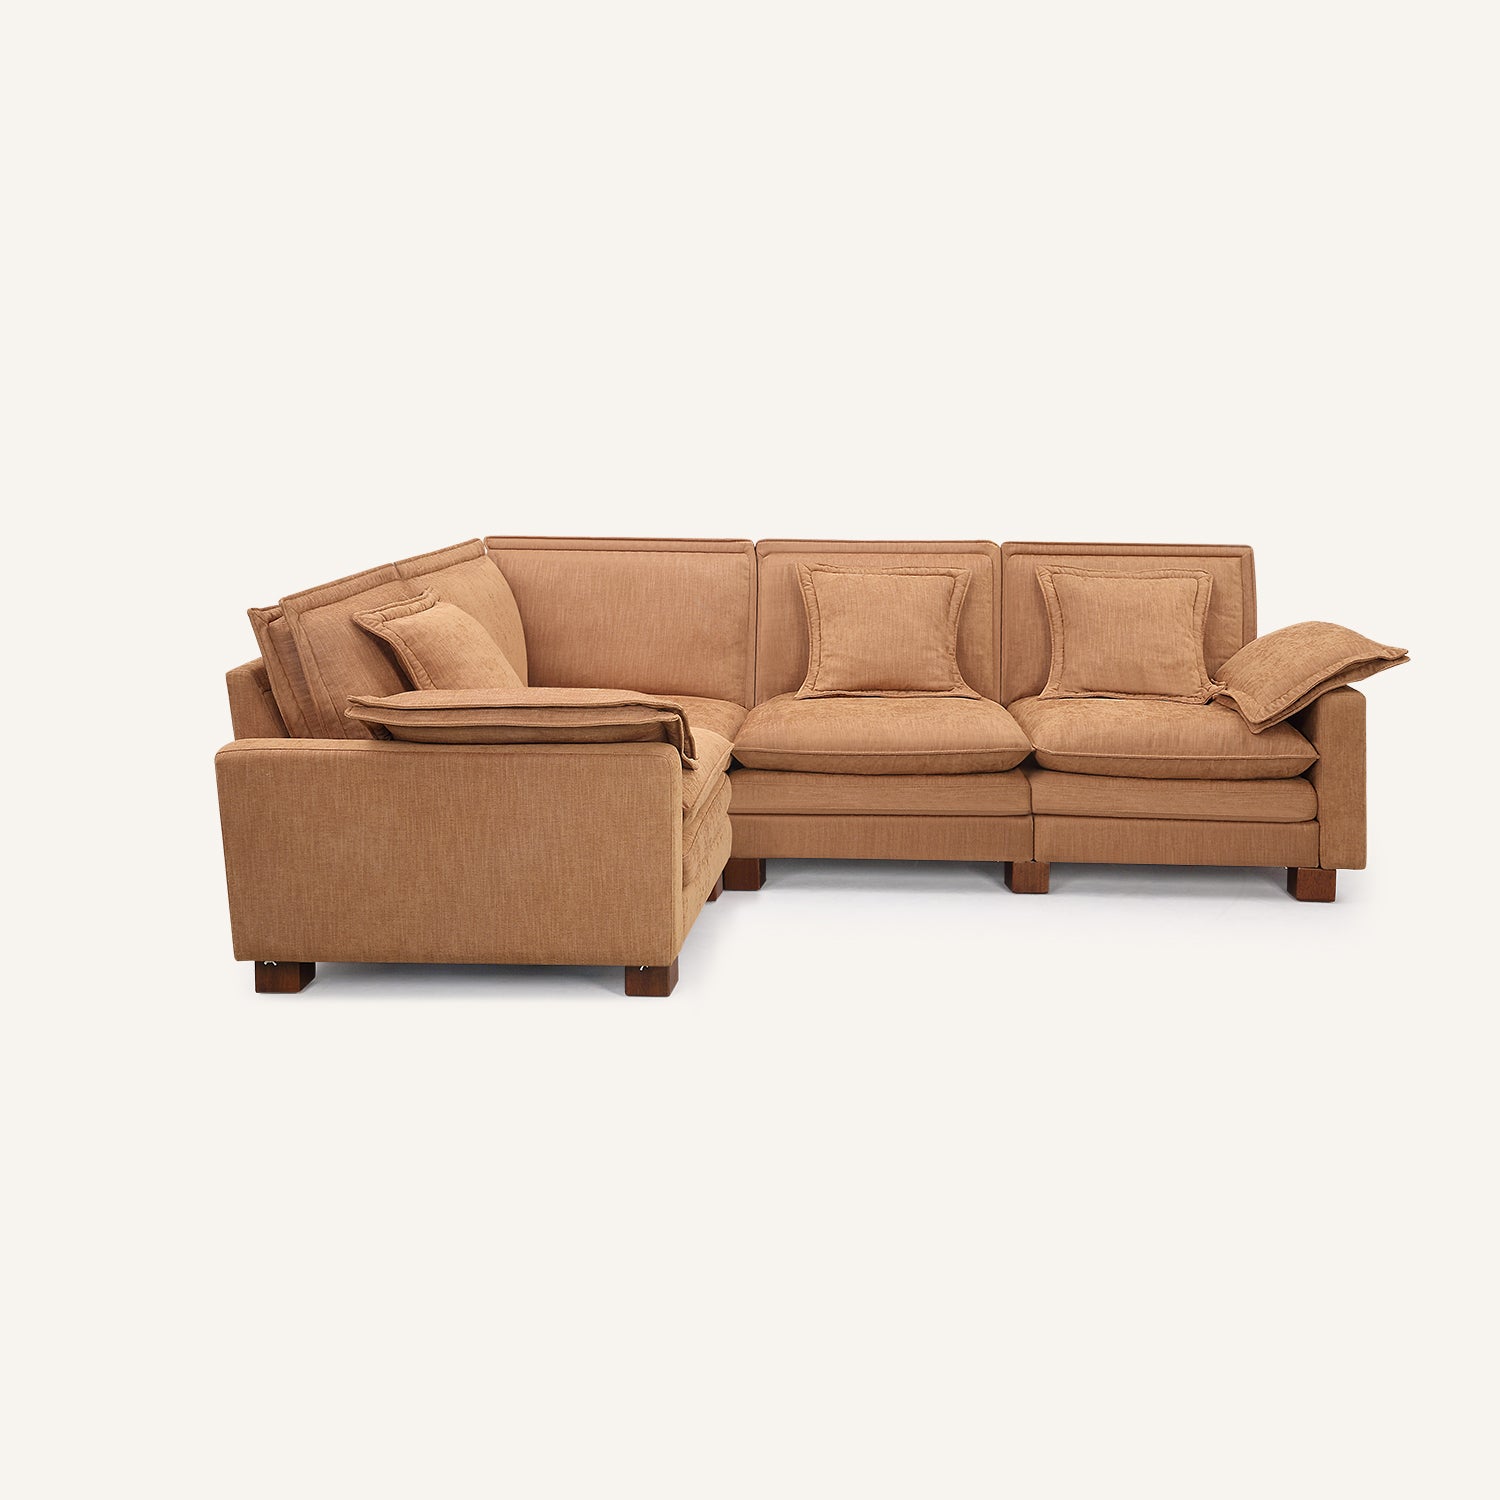 Stacked Tan Linen 4-Seat Corner Sectional